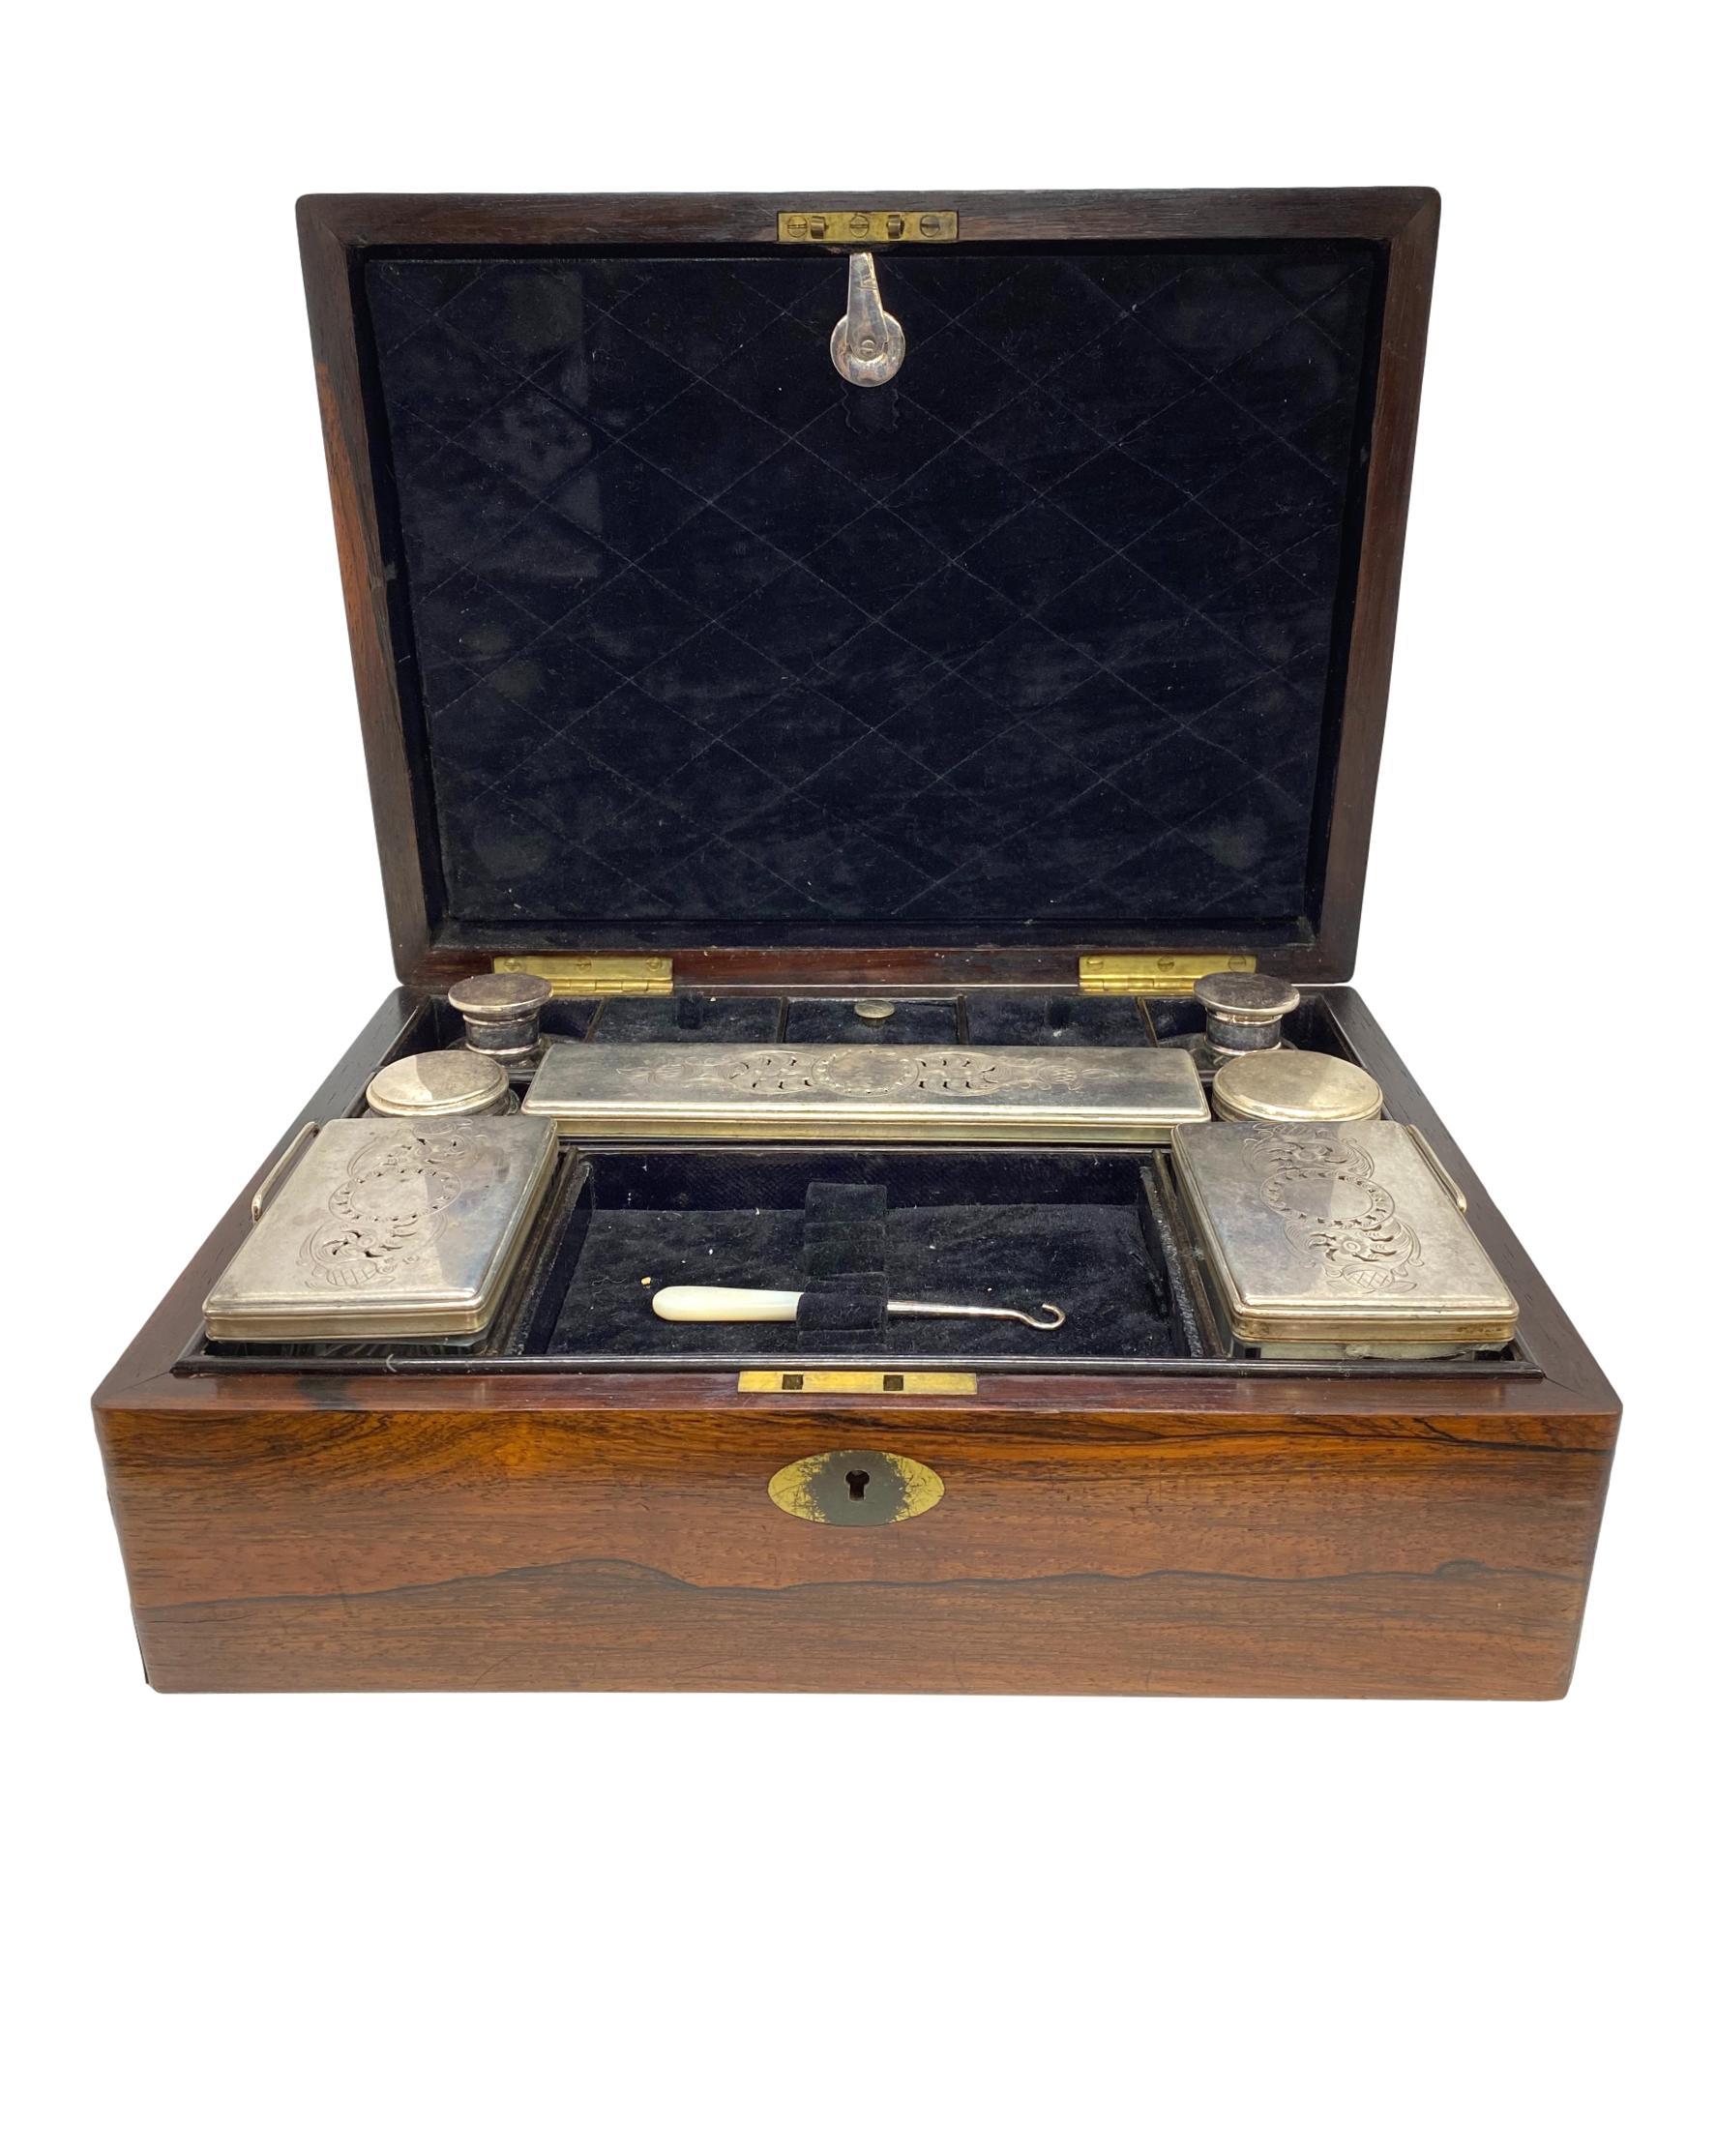 Antique rosewood travel box, with inlaid brass, the fitted interior complete with all items, including brushes, bottles, sewing items, etc., English, circa 1870.